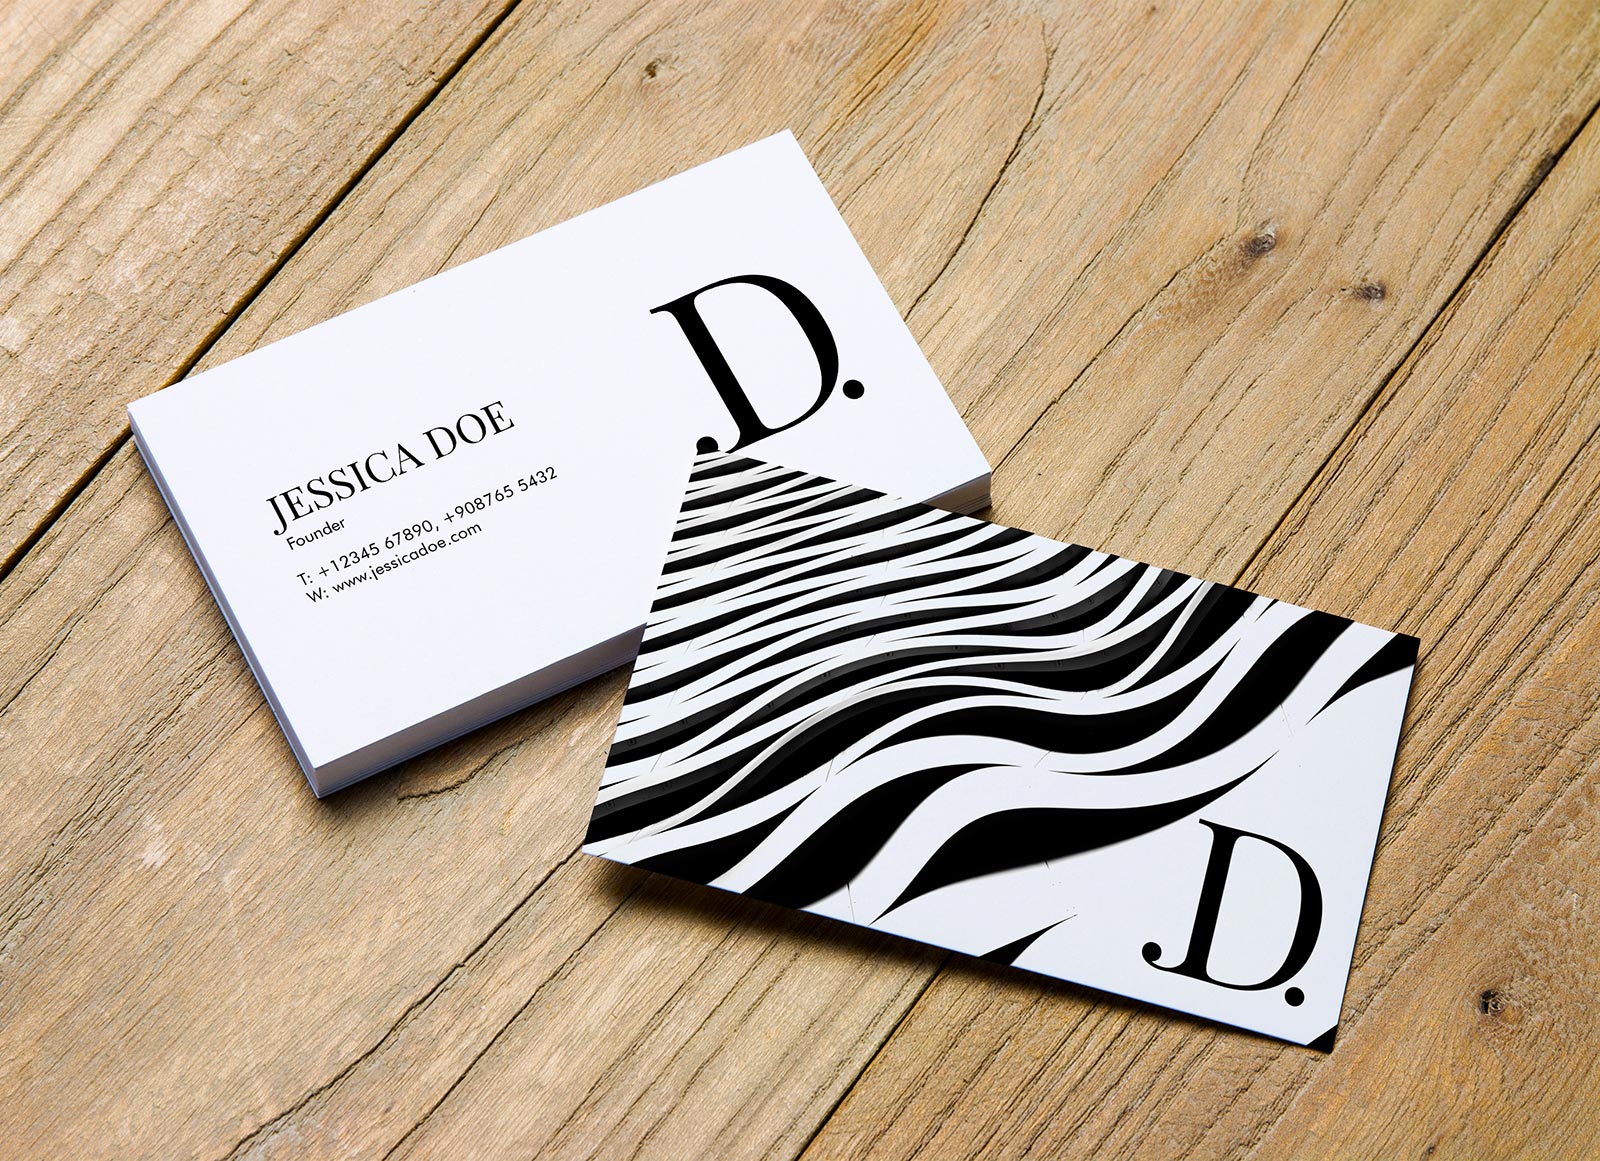 business card photoshop mockup free download